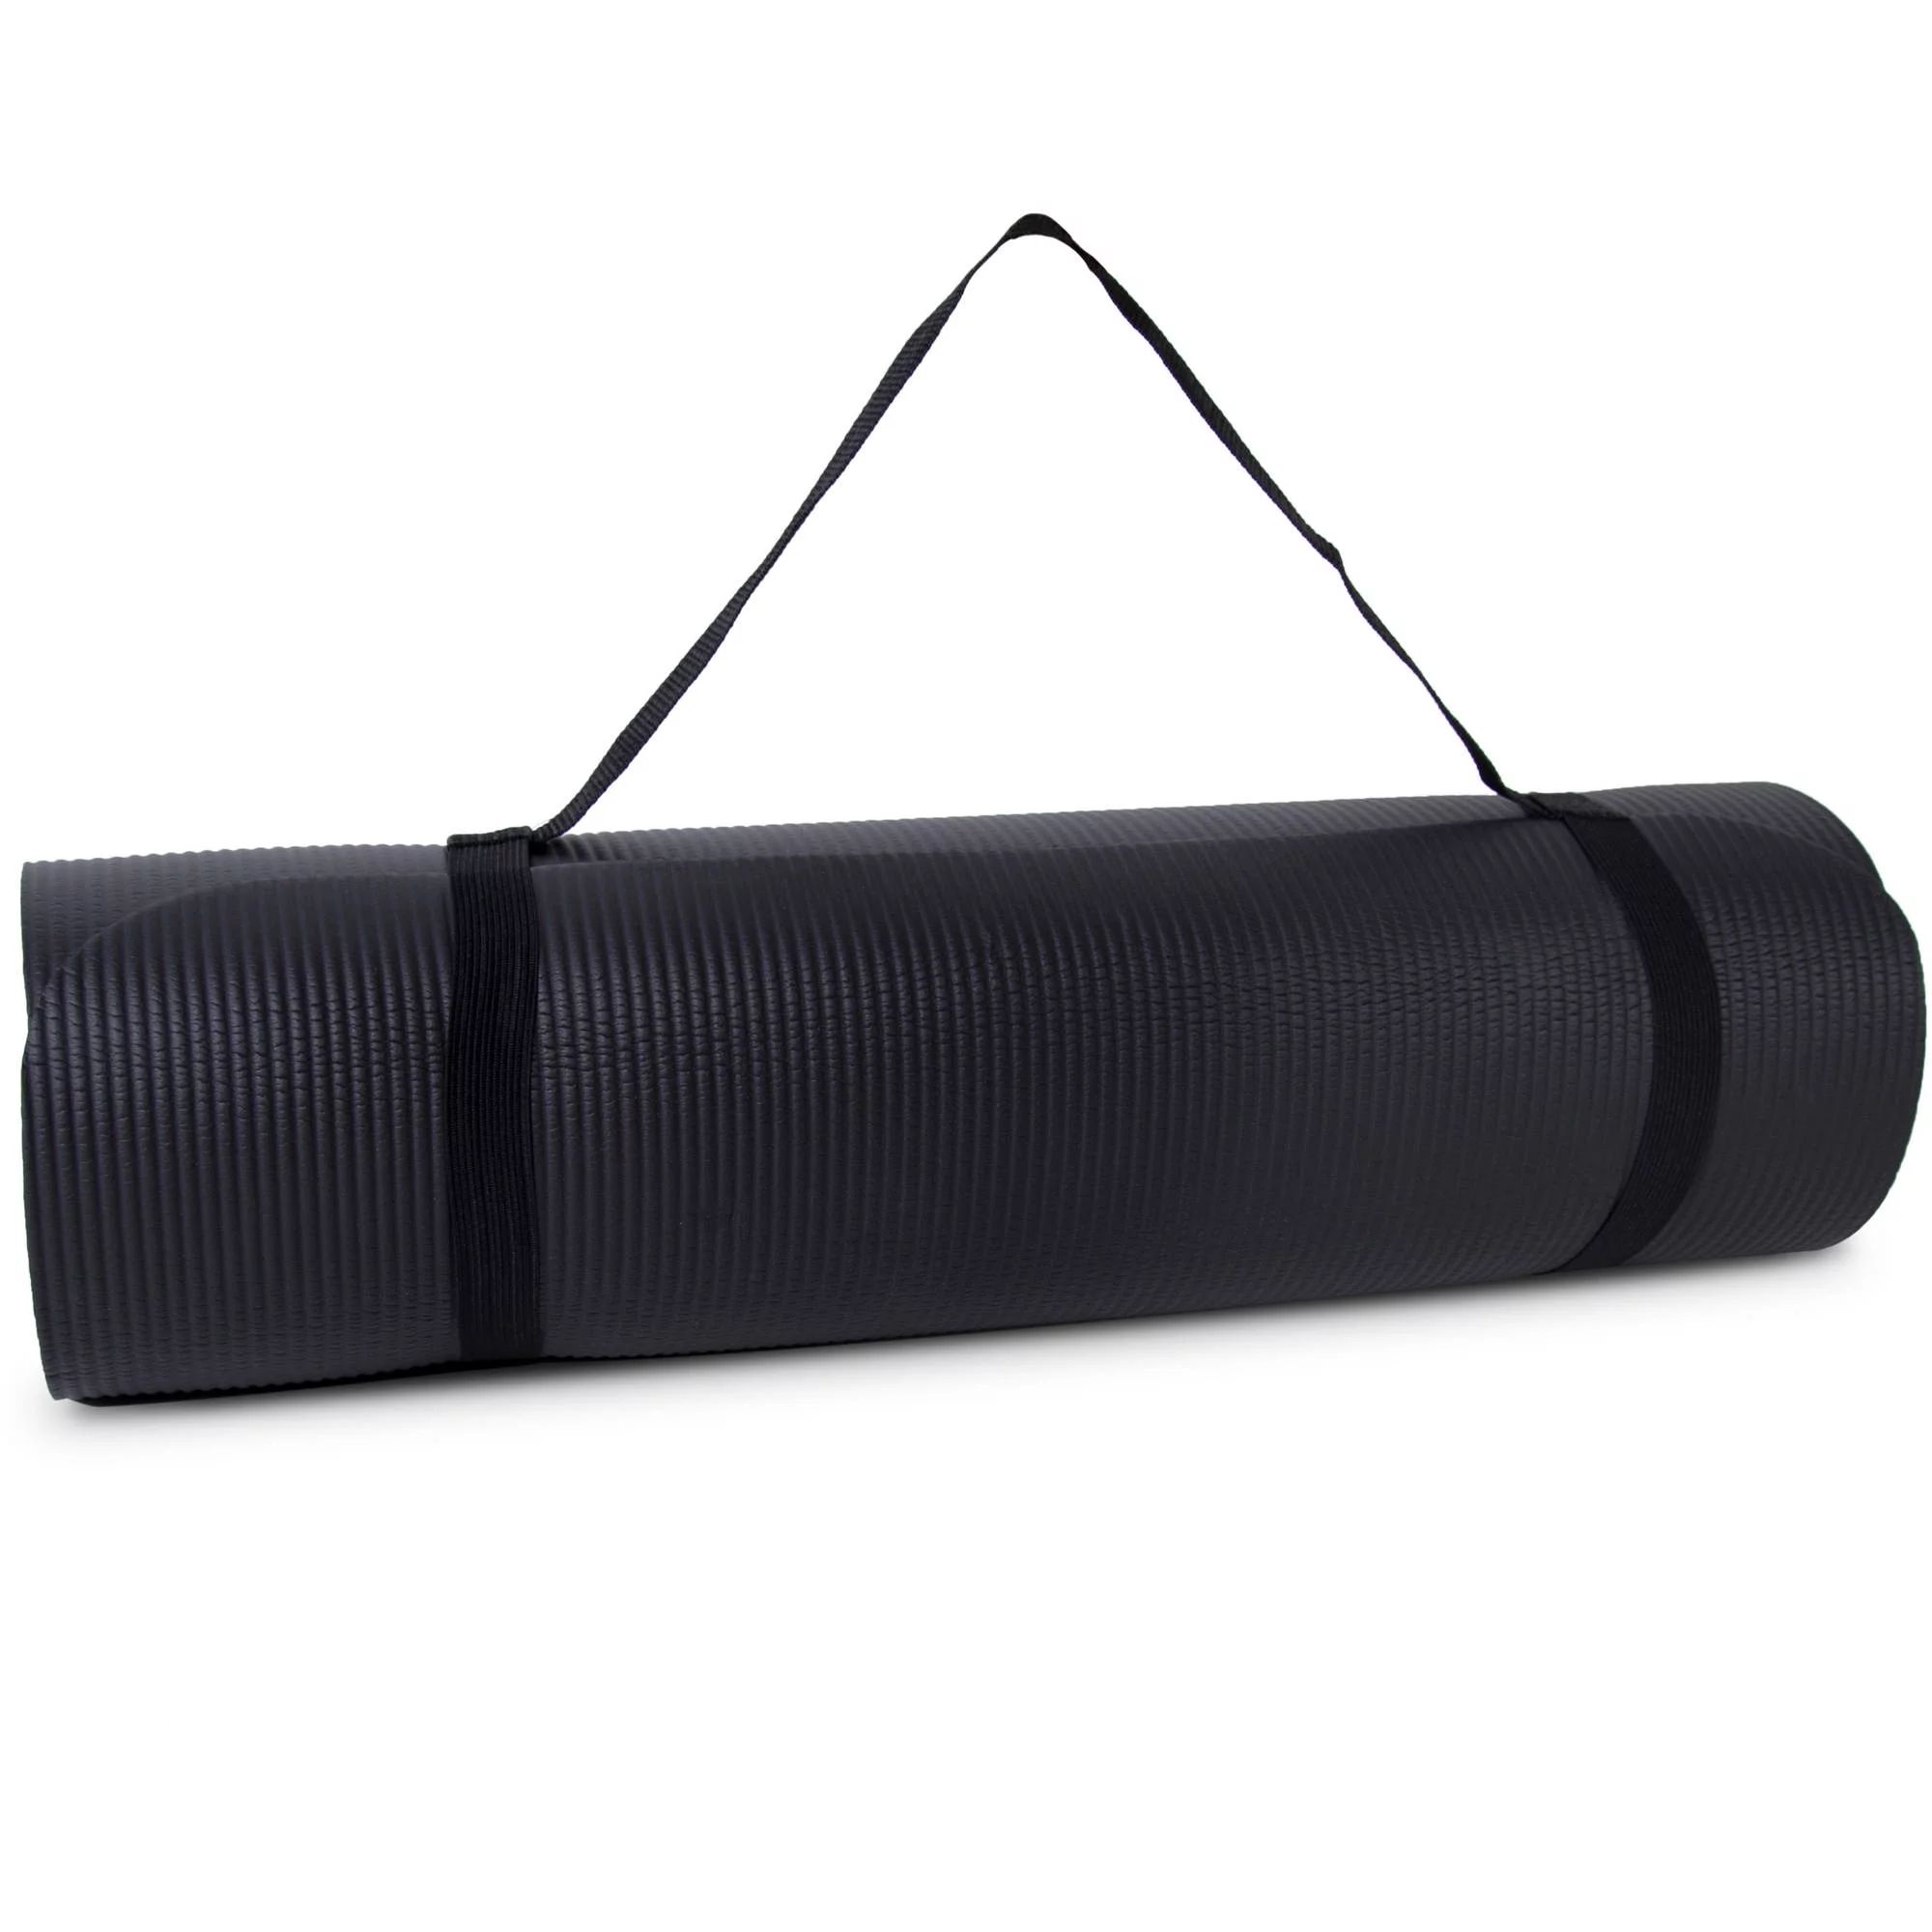 Tone Fitness NBR High Density Yoga Exercise Mat with Carry Strap, Black | Walmart (US)